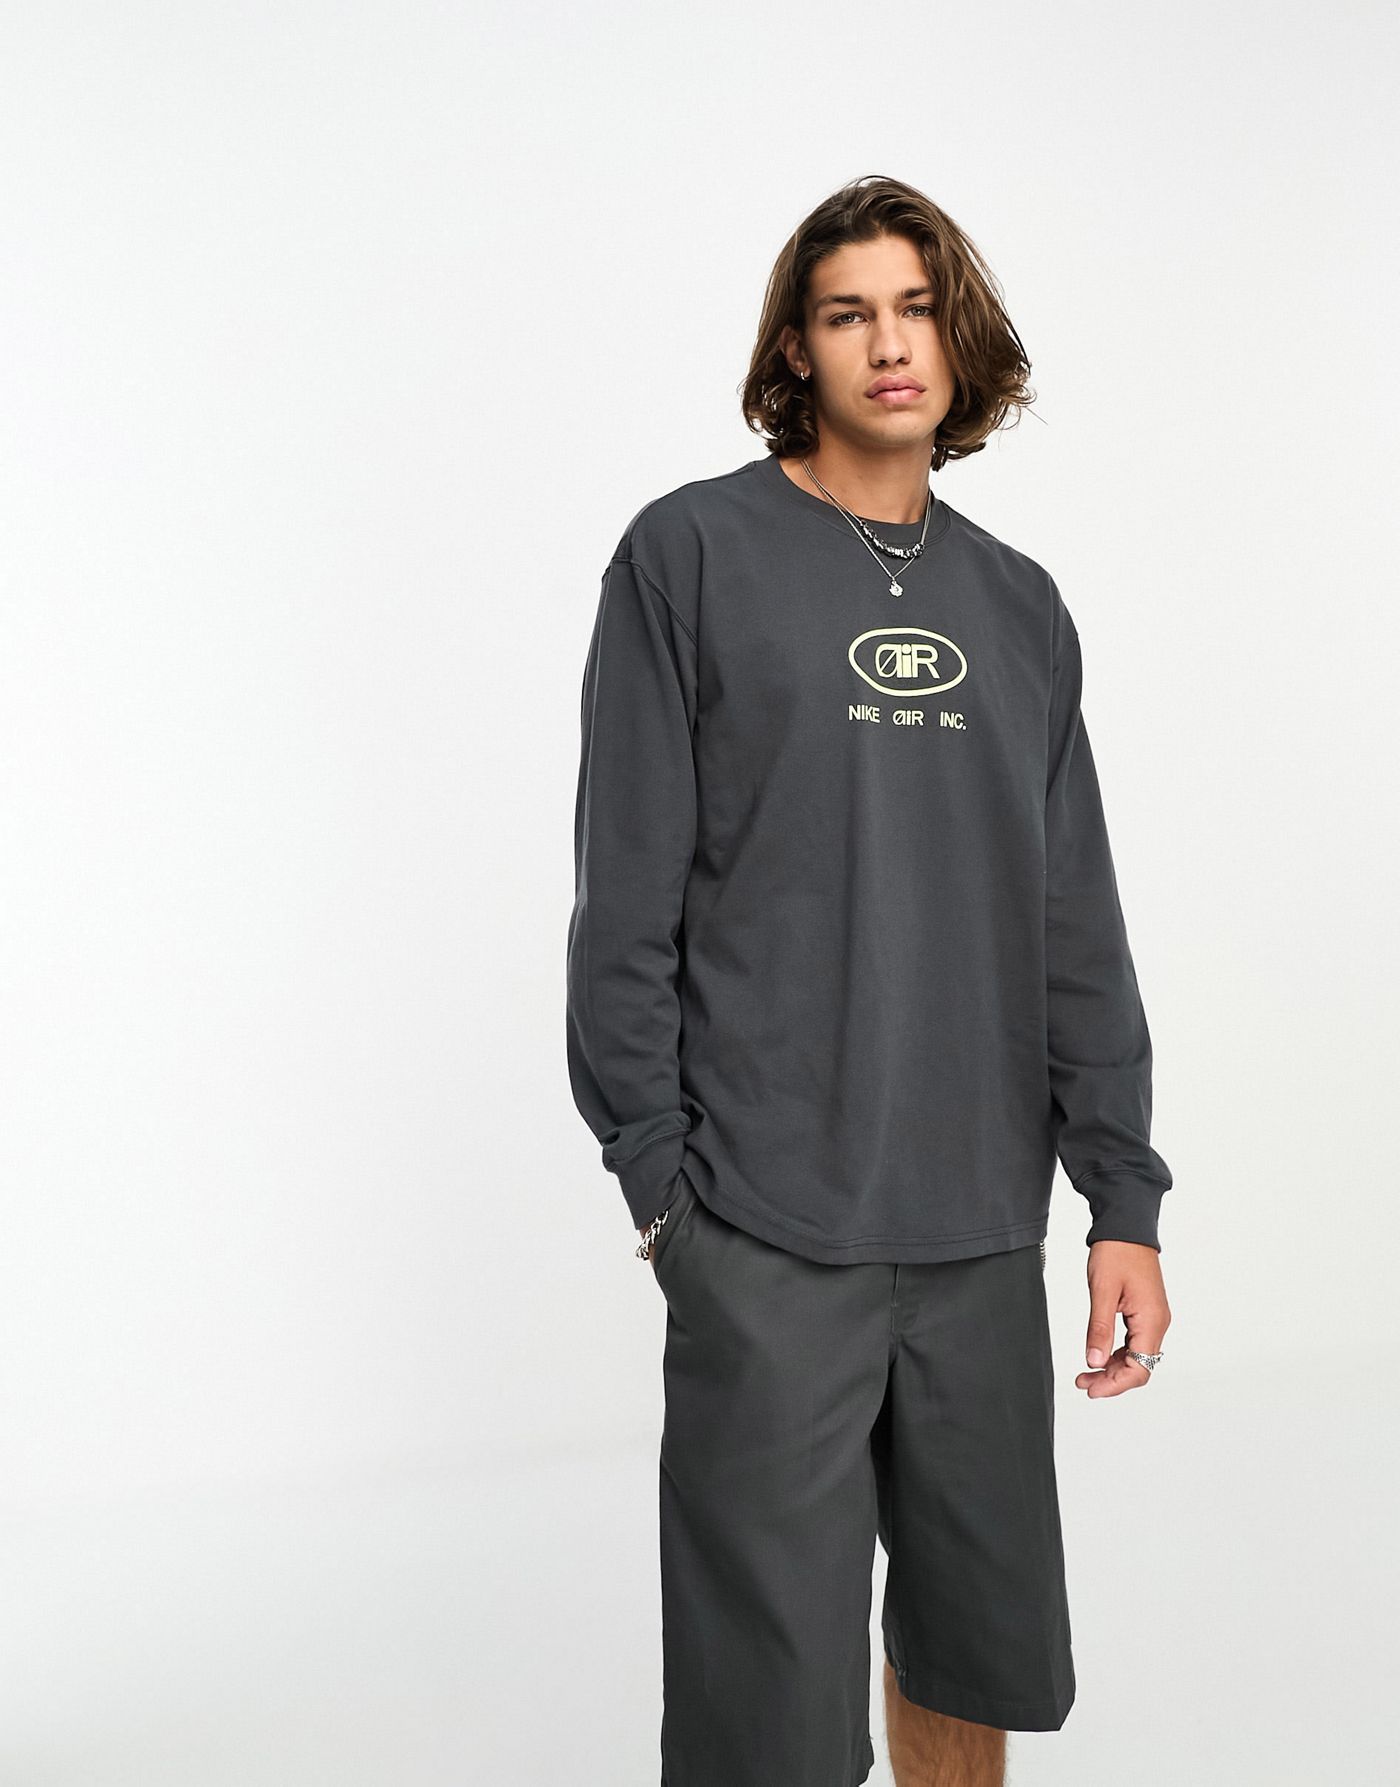 Nike M90 graphic long sleeve t-shirt in charcoal black 